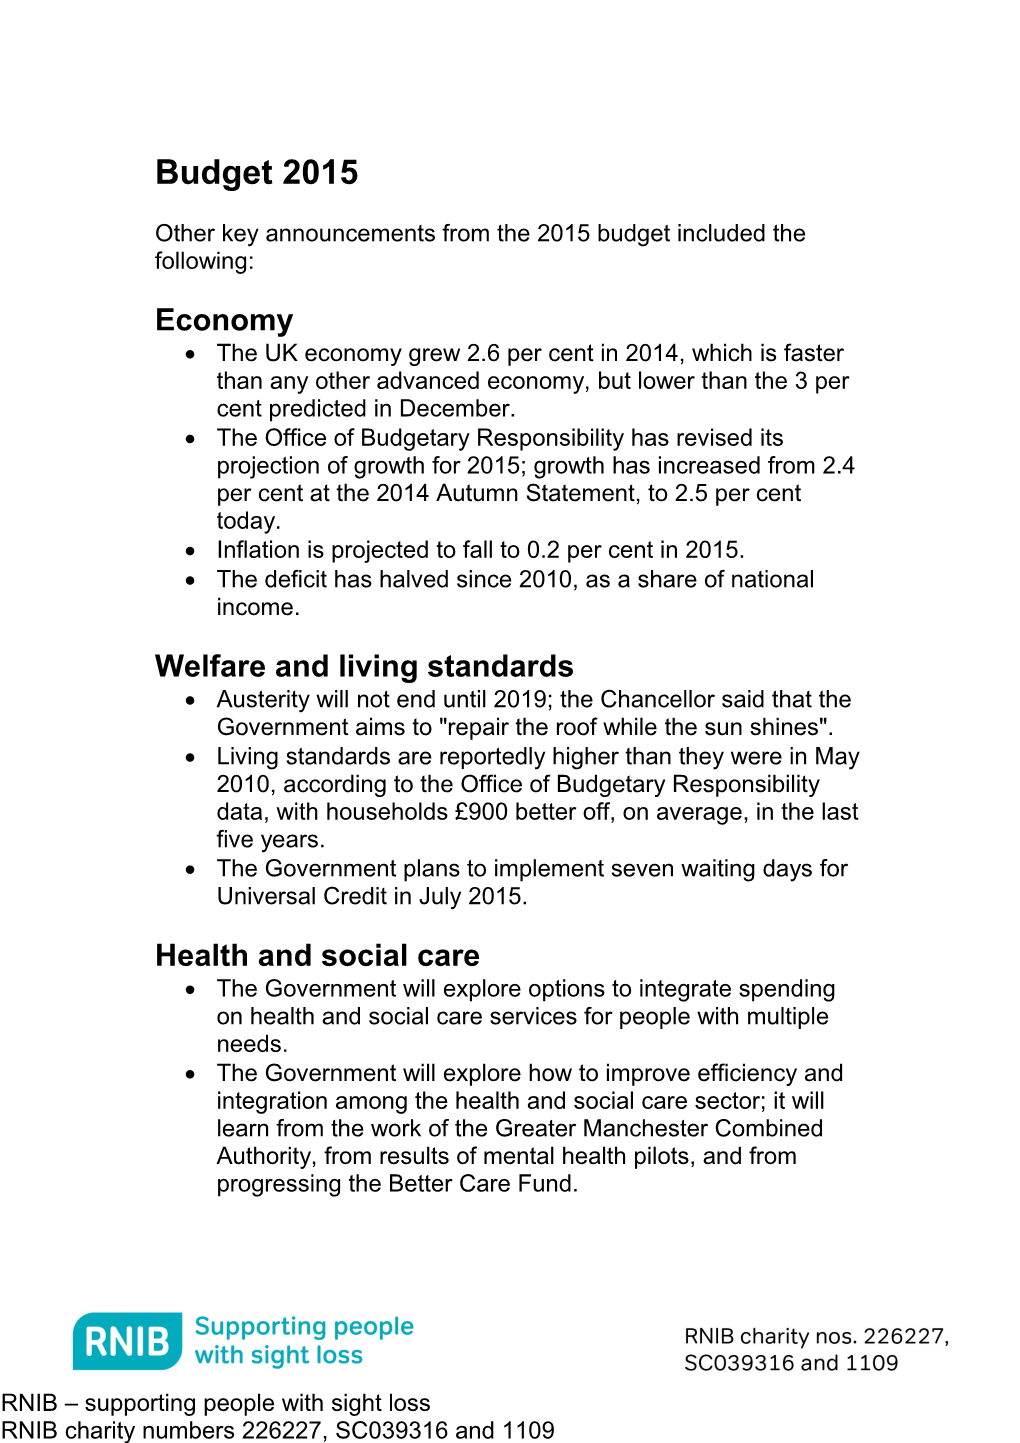 Other Key Announcements from the 2015 Budget Included the Following